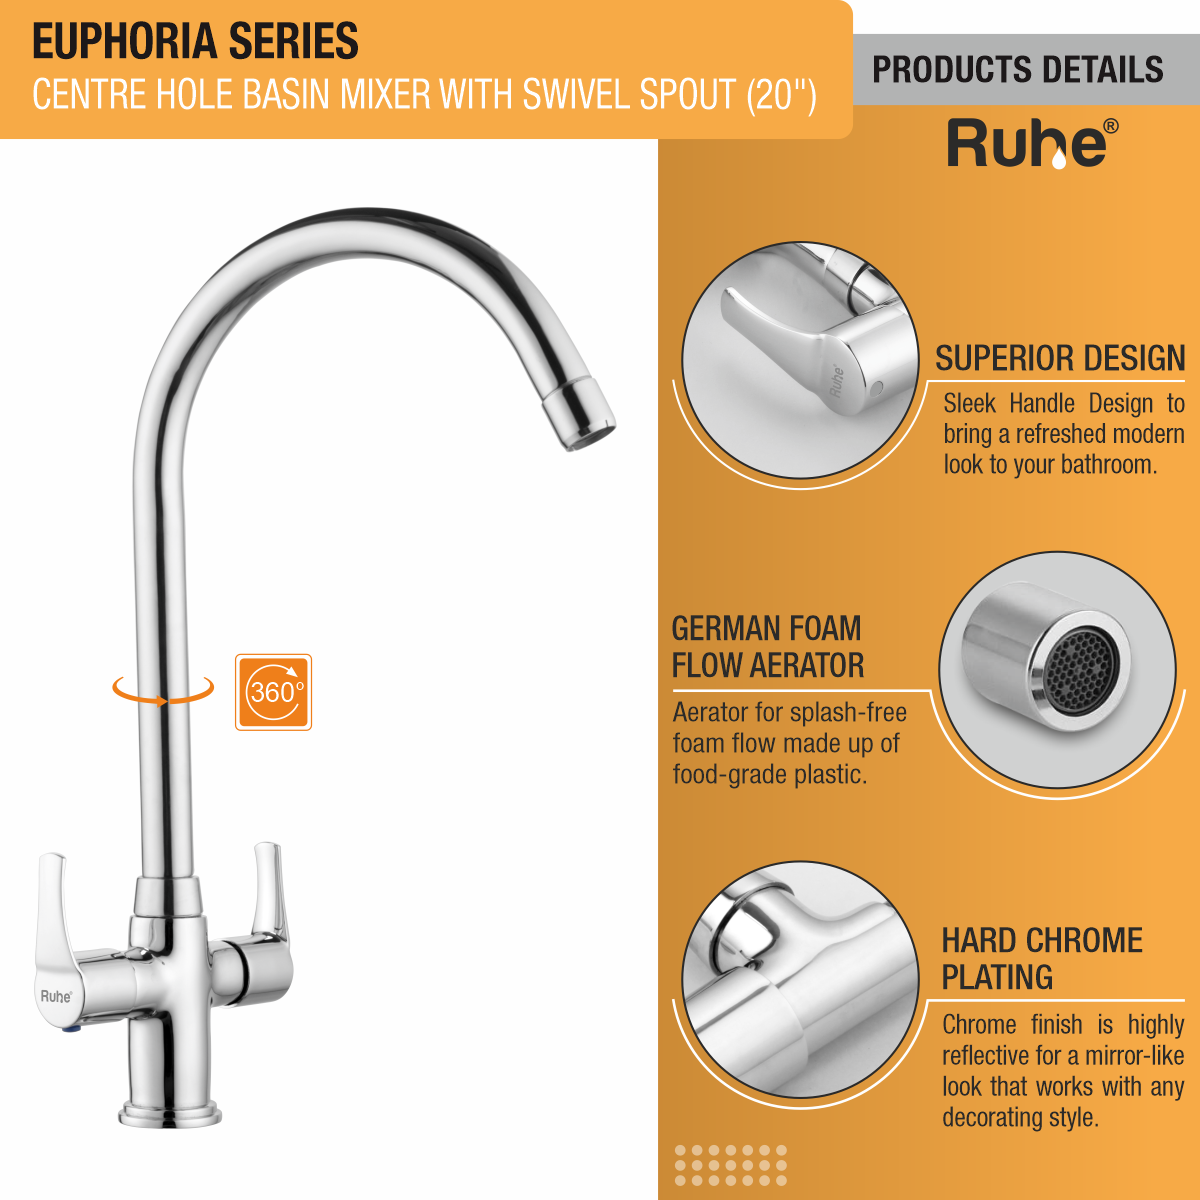 Euphoria Centre Hole Basin Mixer with Large (20 inches) Round Swivel Spout Faucet product details